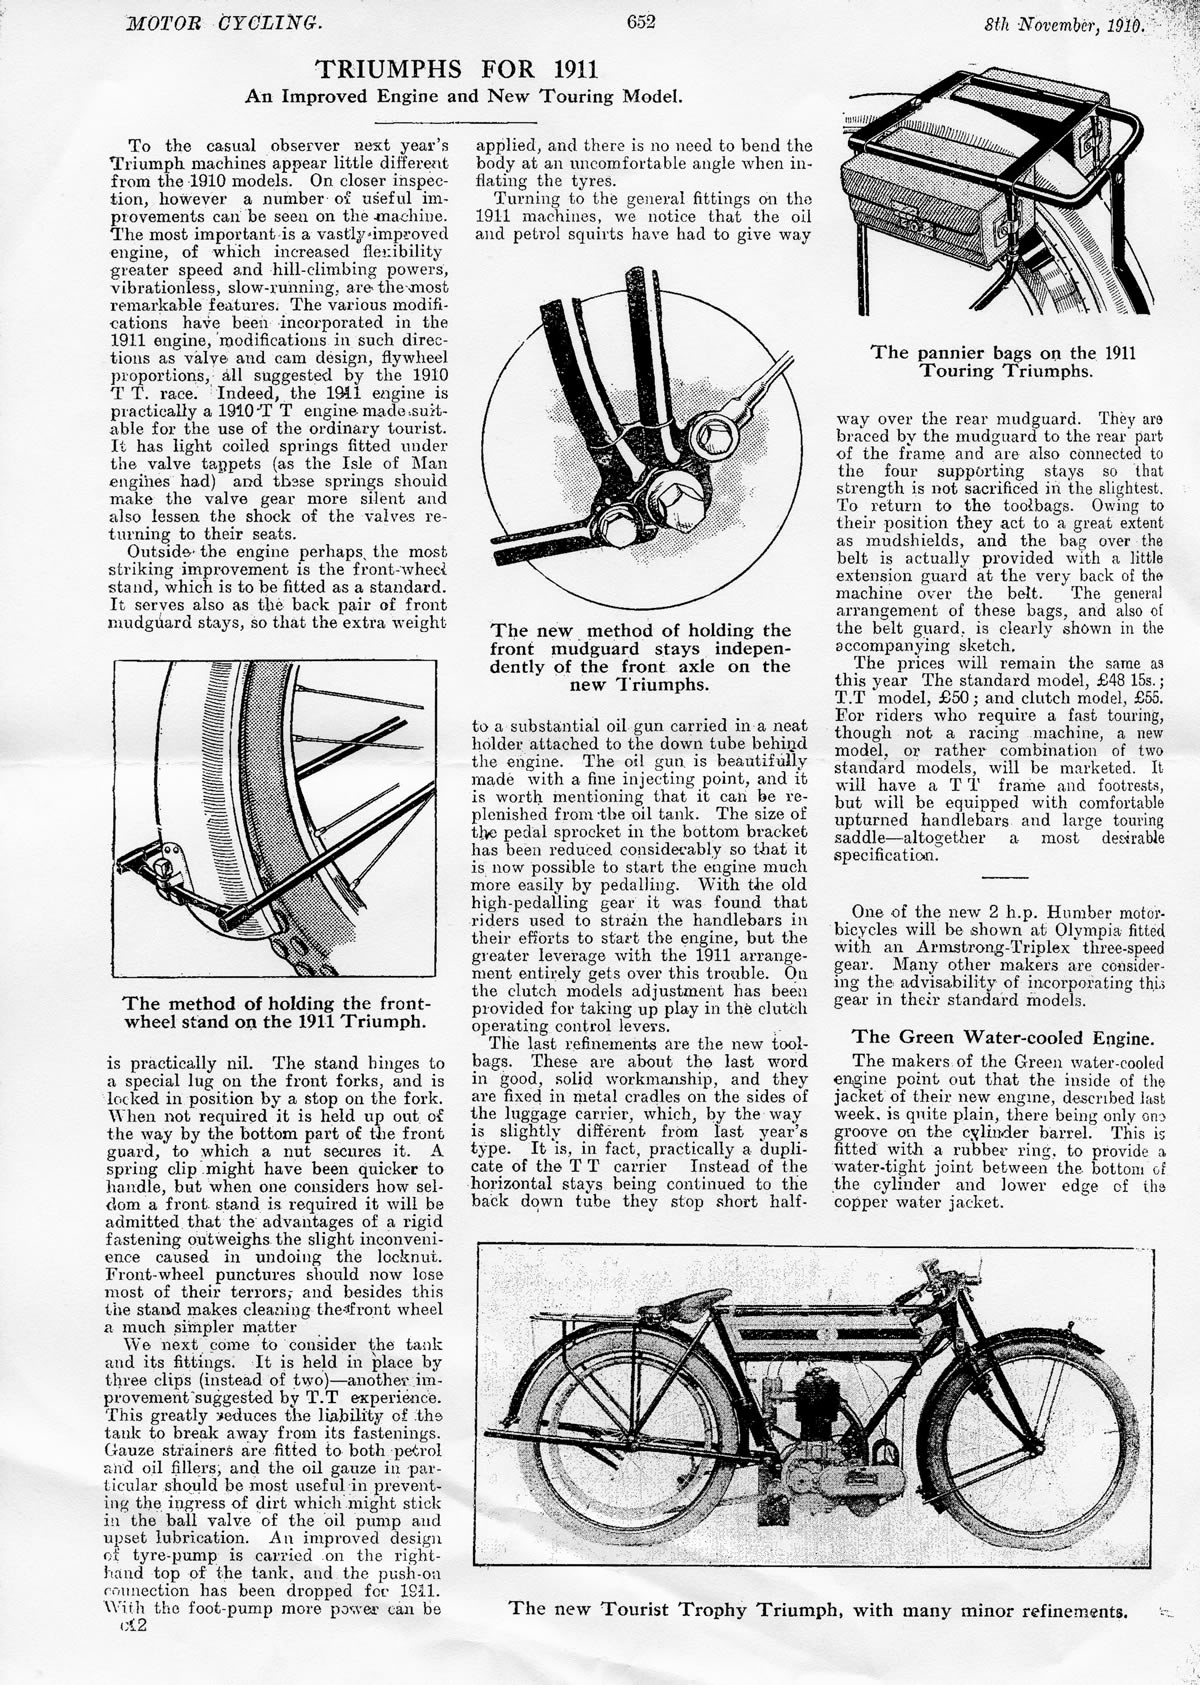 1911 Triumph Motorcycle review